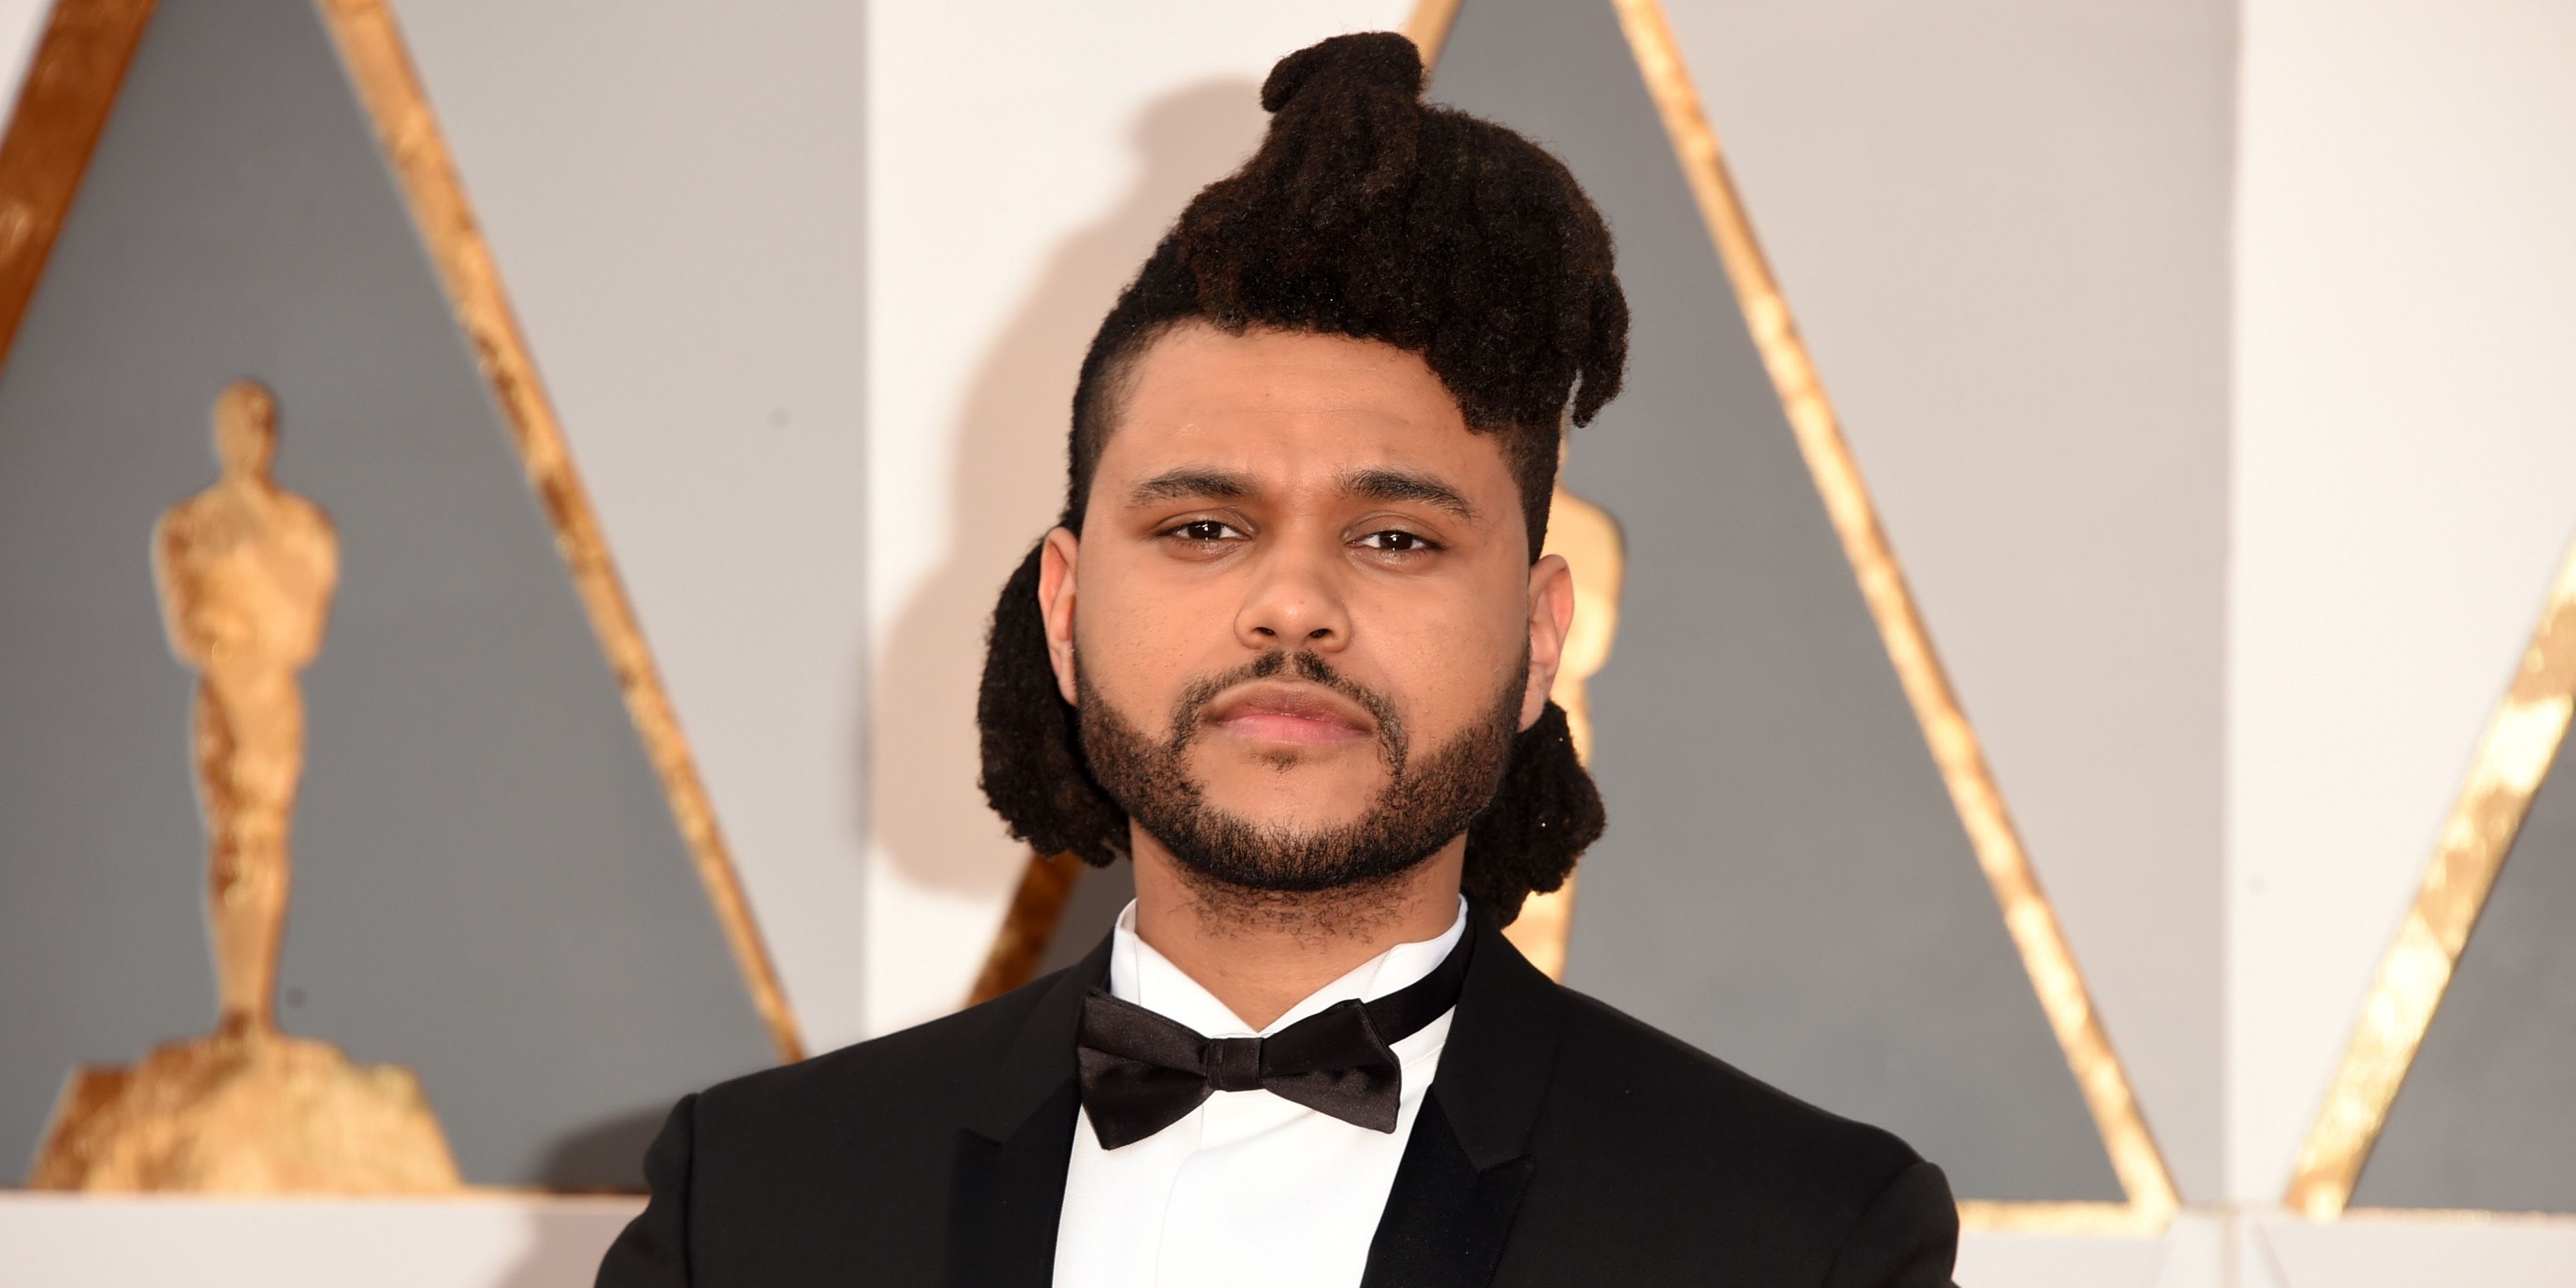 The Weeknd Has Chopped Off His Hair And Now Looks Hot